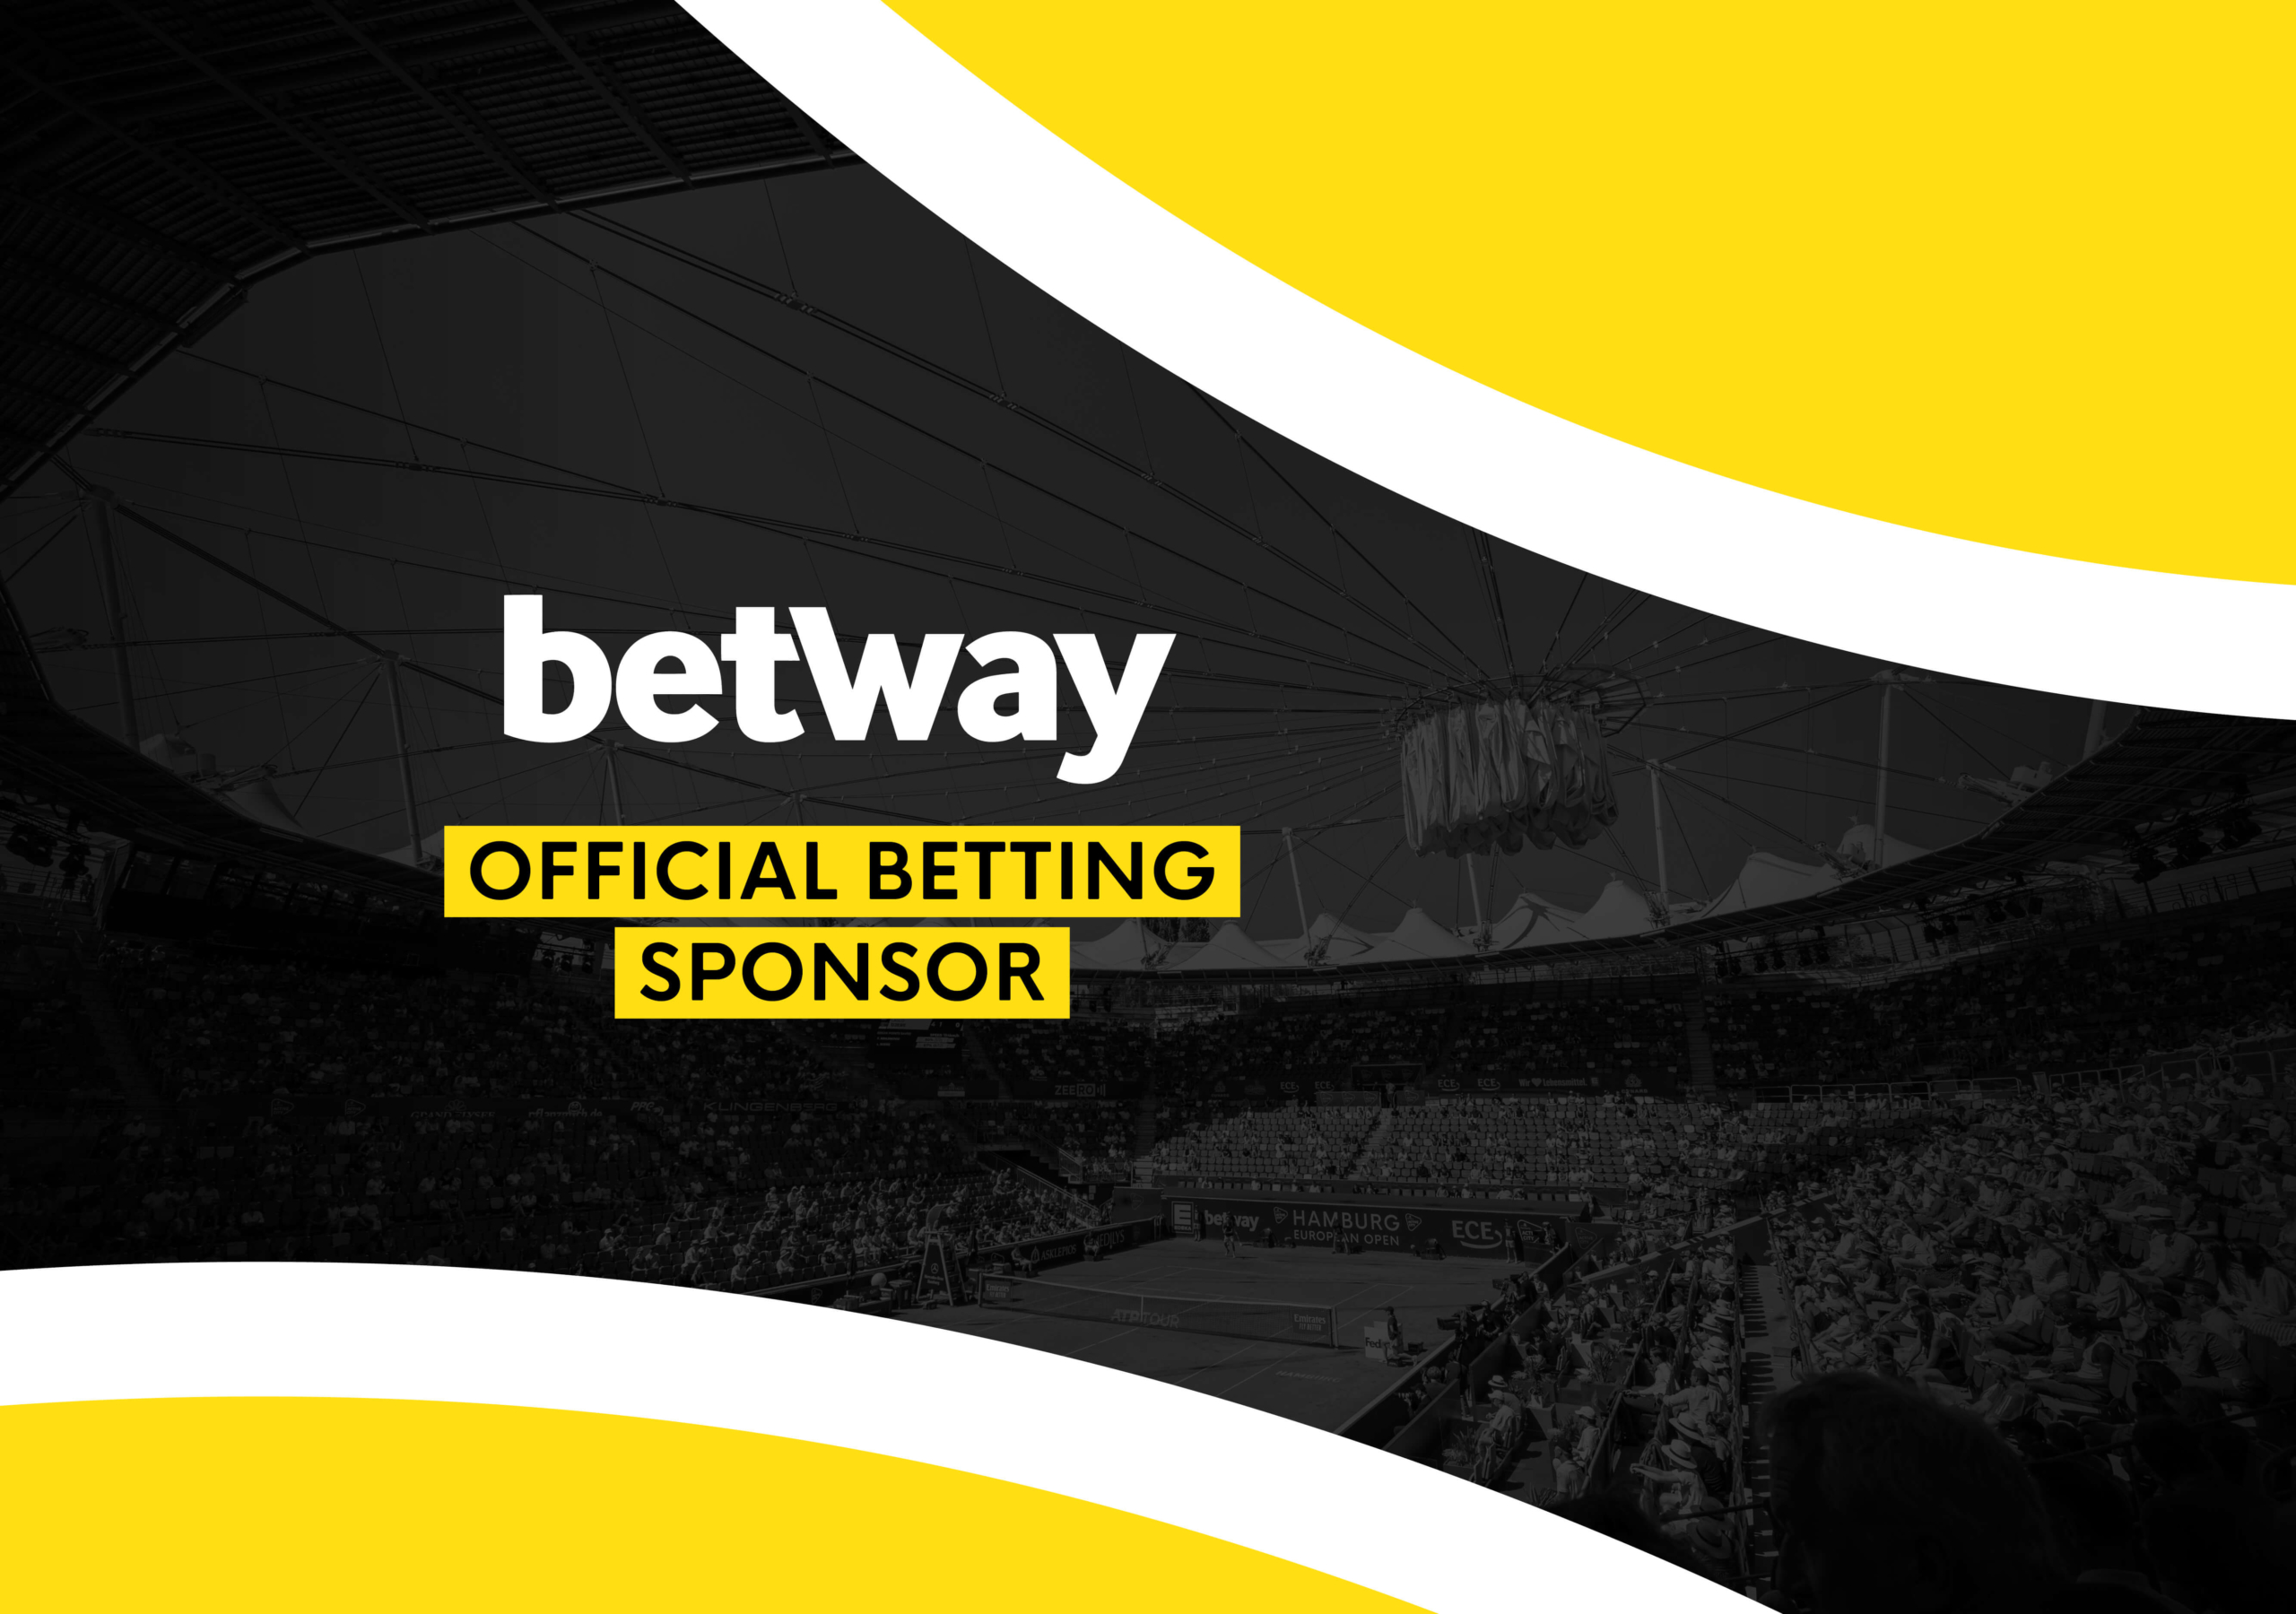  A black and yellow background with the Betway logo and 'Official Betting Sponsor' text overlaid on top of a photo of a tennis stadium.